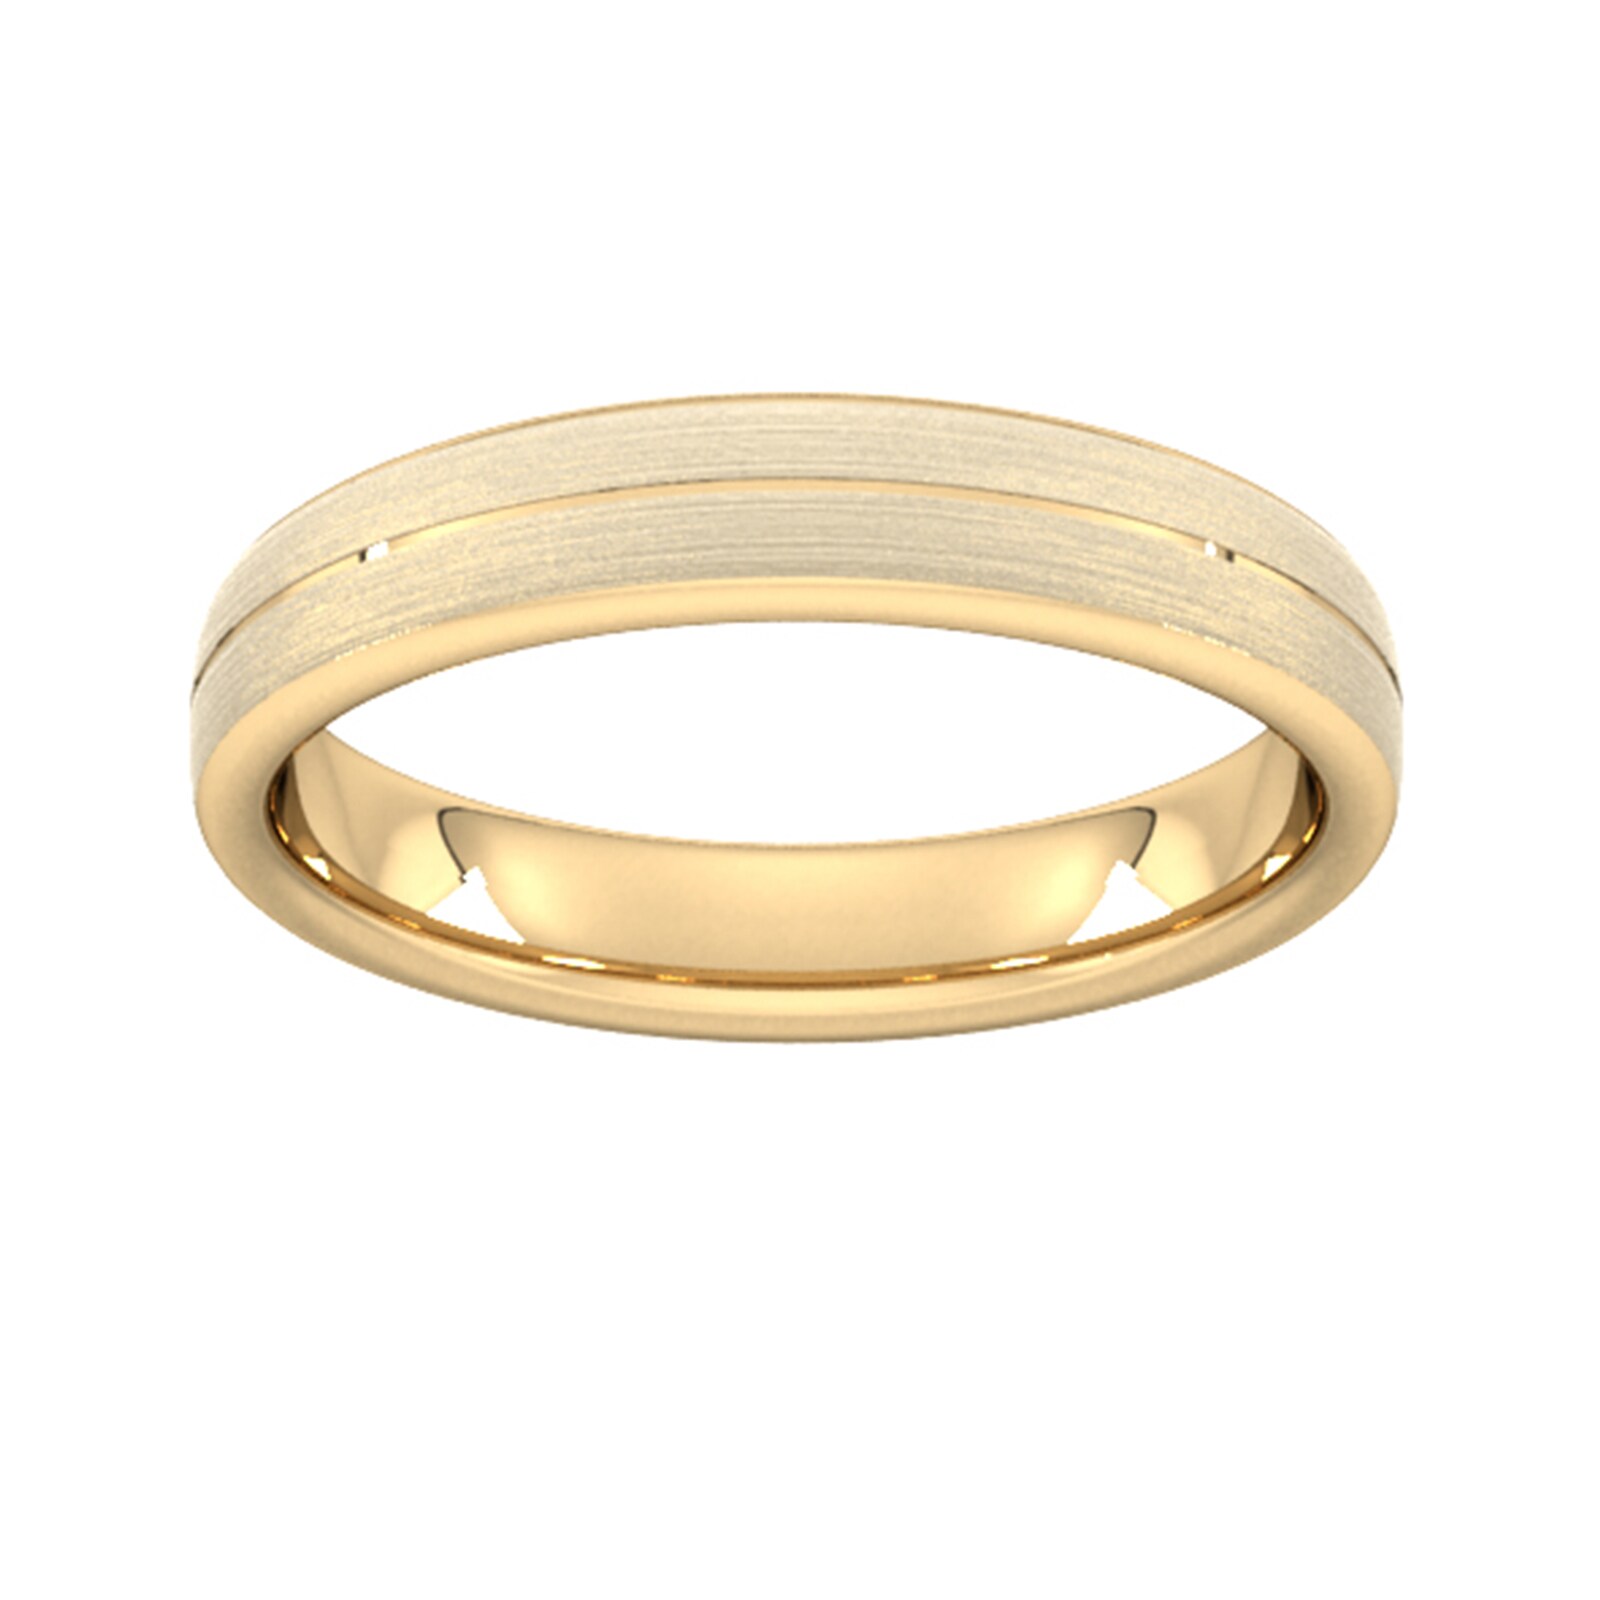 4mm Traditional Court Standard Centre Groove With Chamfered Edge Wedding Ring In 18 Carat Yellow Gold - Ring Size P